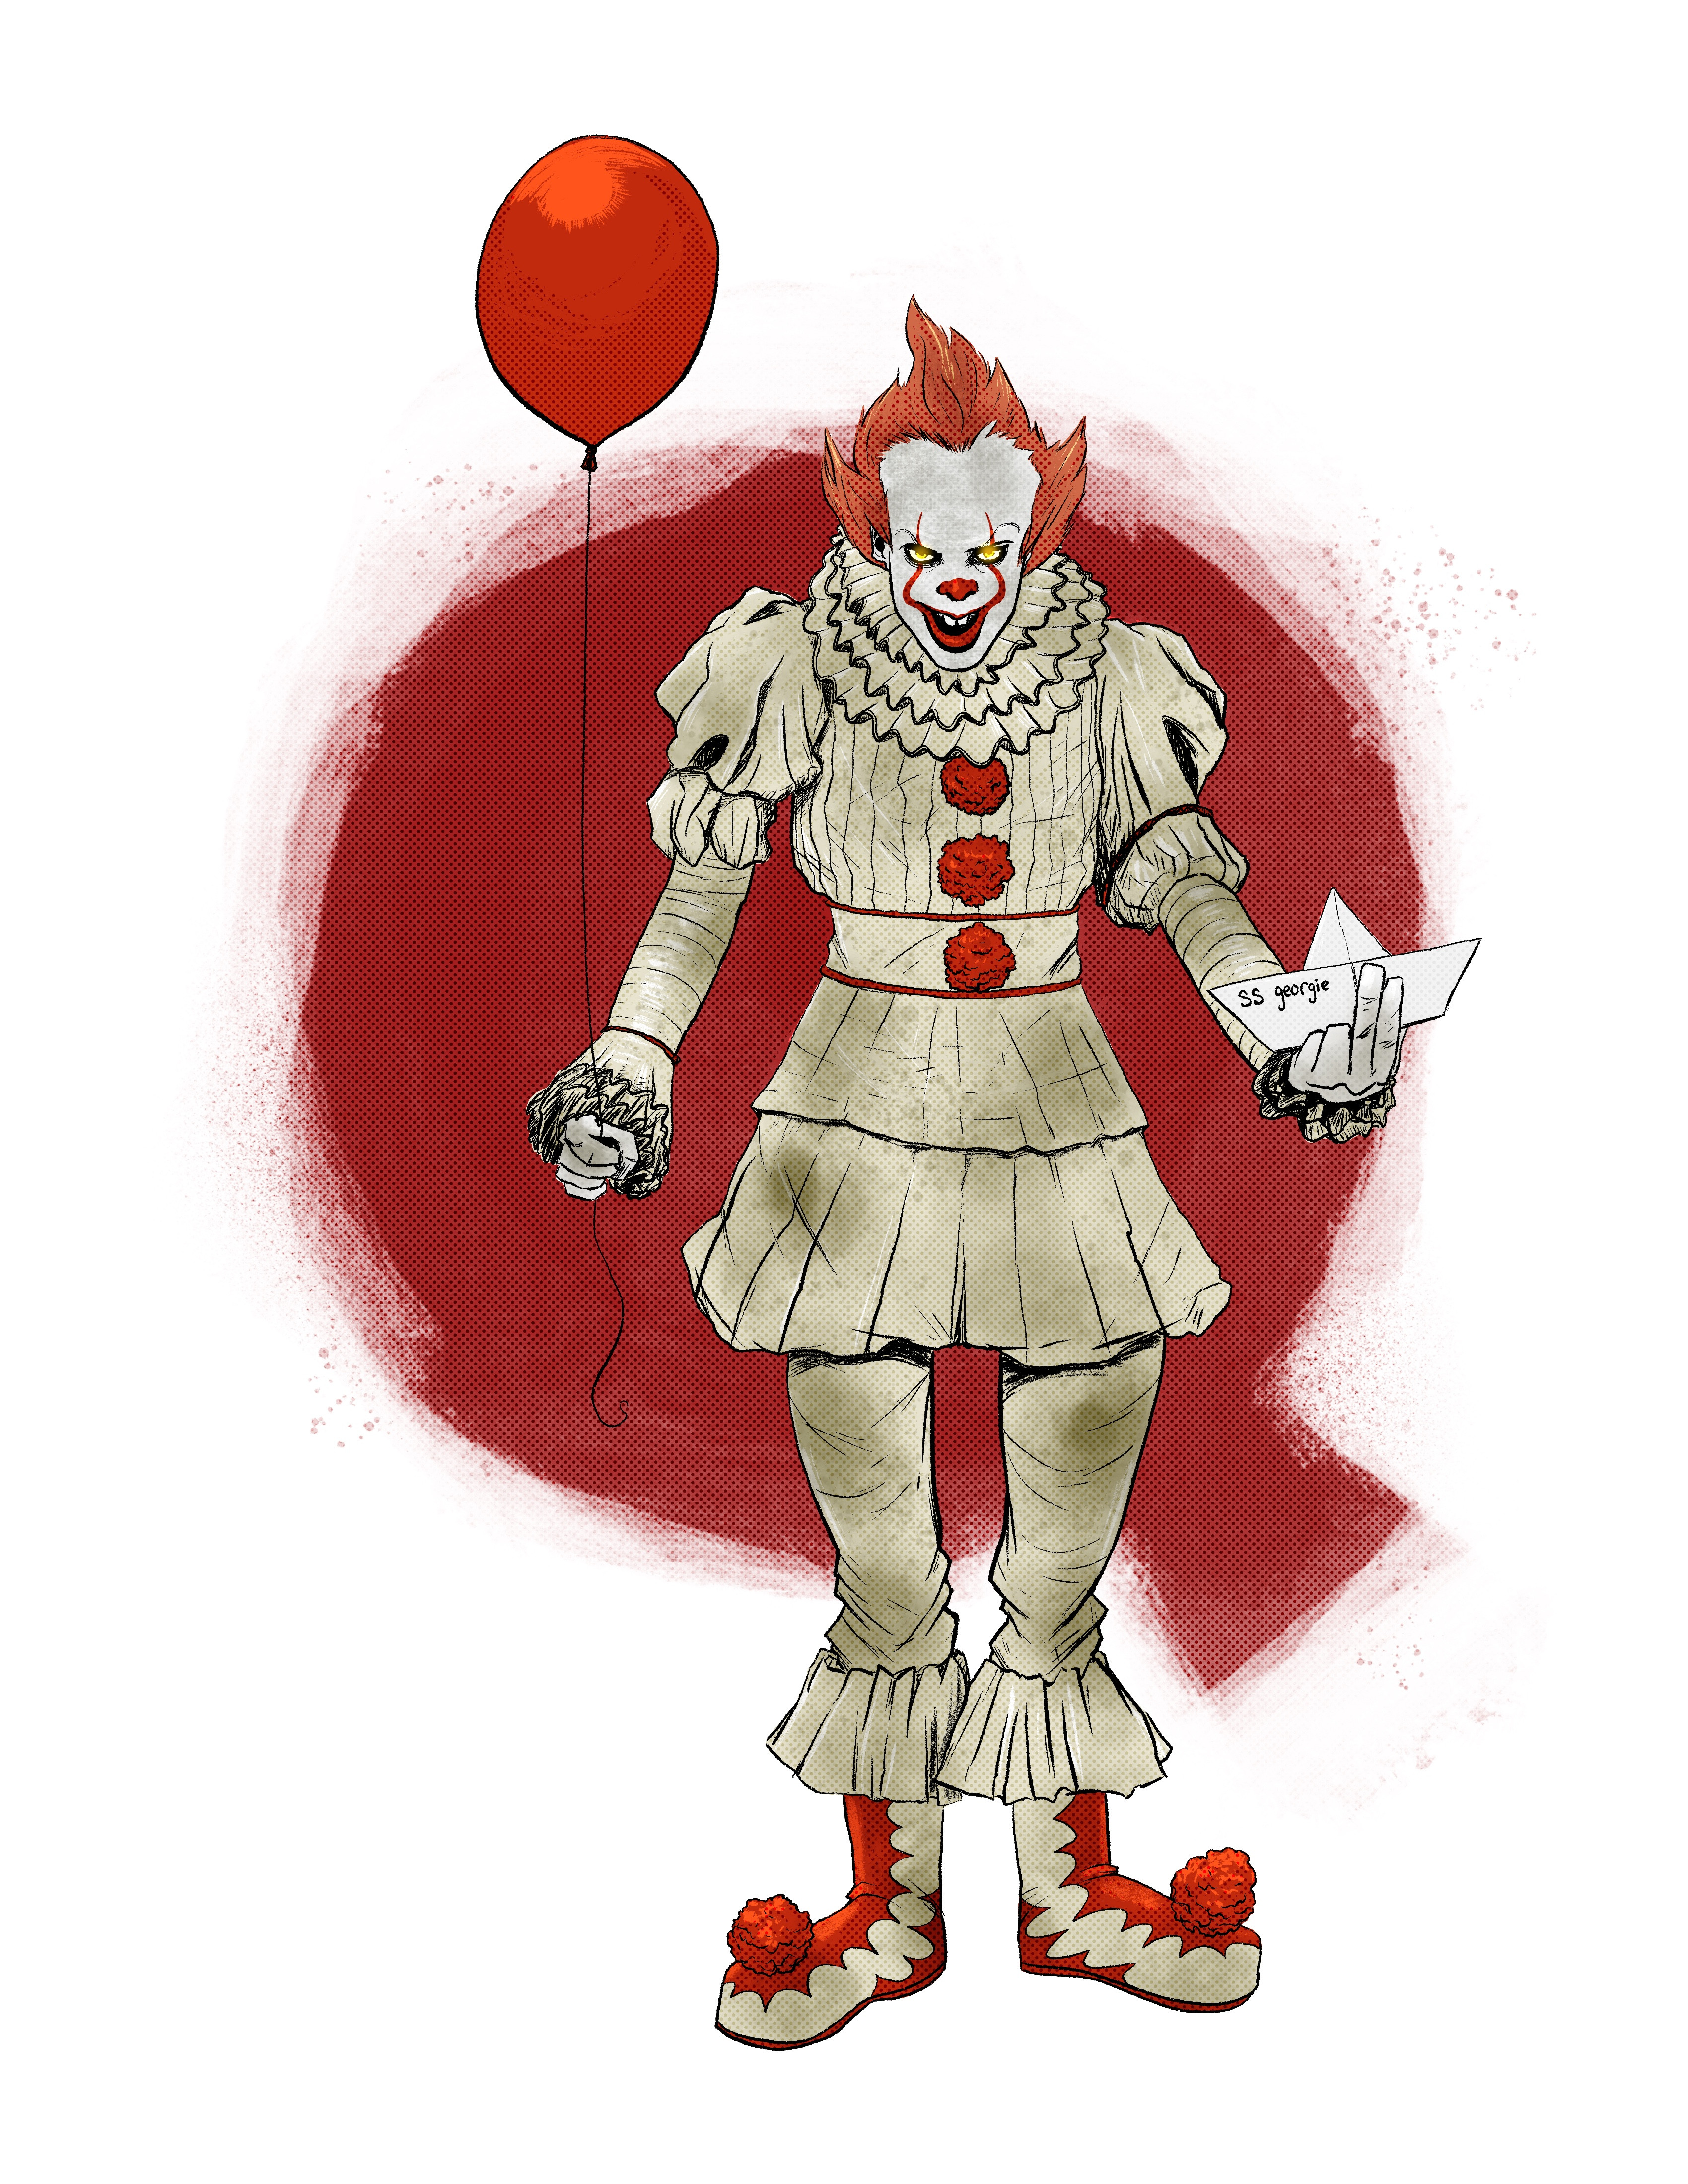 Pennywise the Dancing Clown - Digital in Procreate